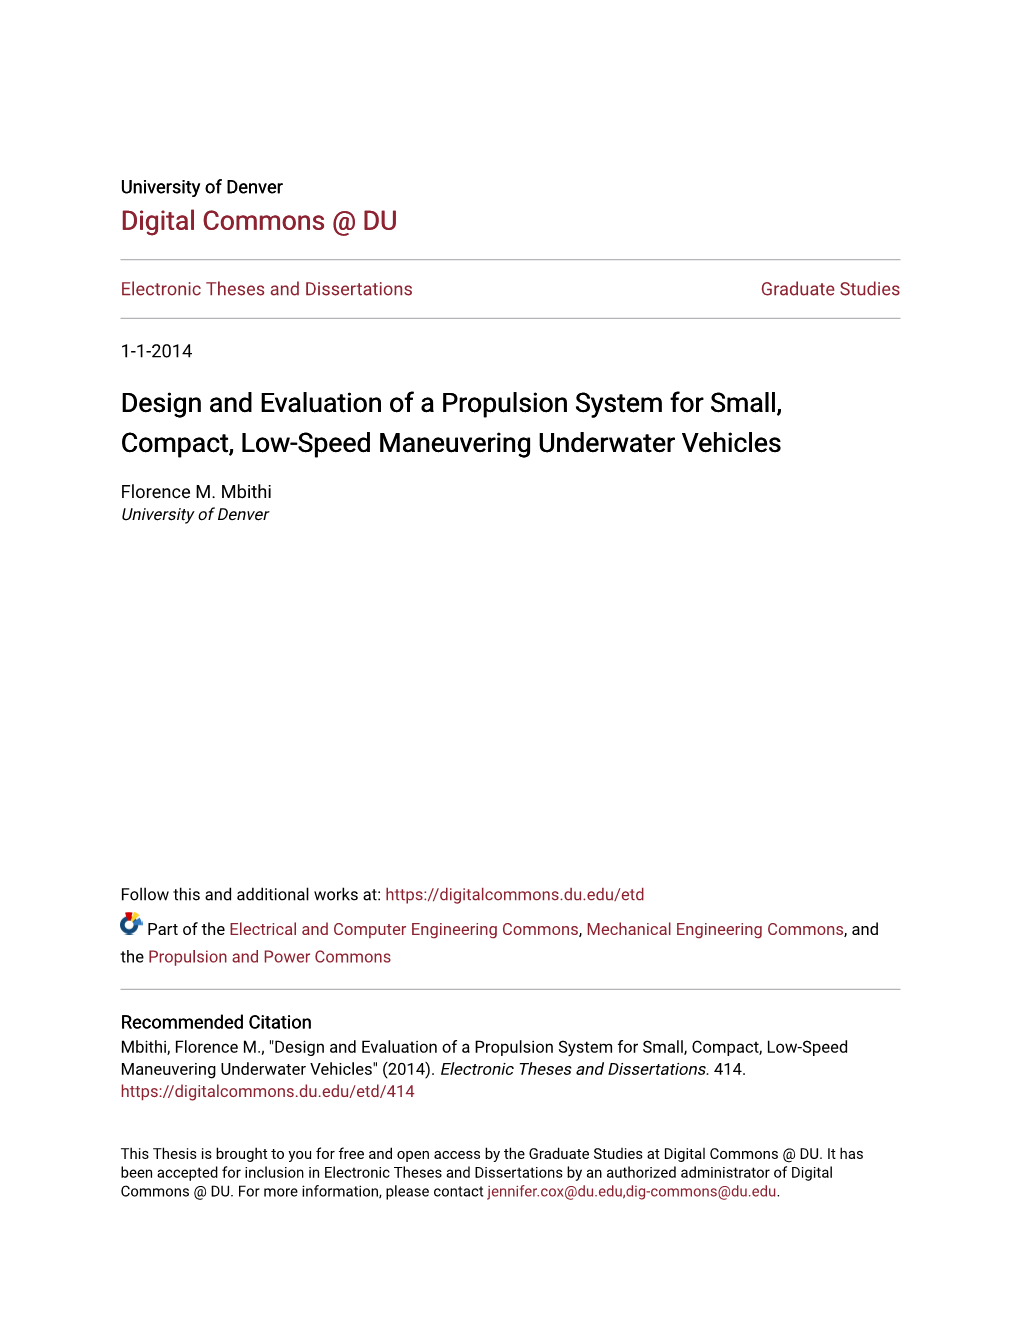 Design and Evaluation of a Propulsion System for Small, Compact, Low-Speed Maneuvering Underwater Vehicles